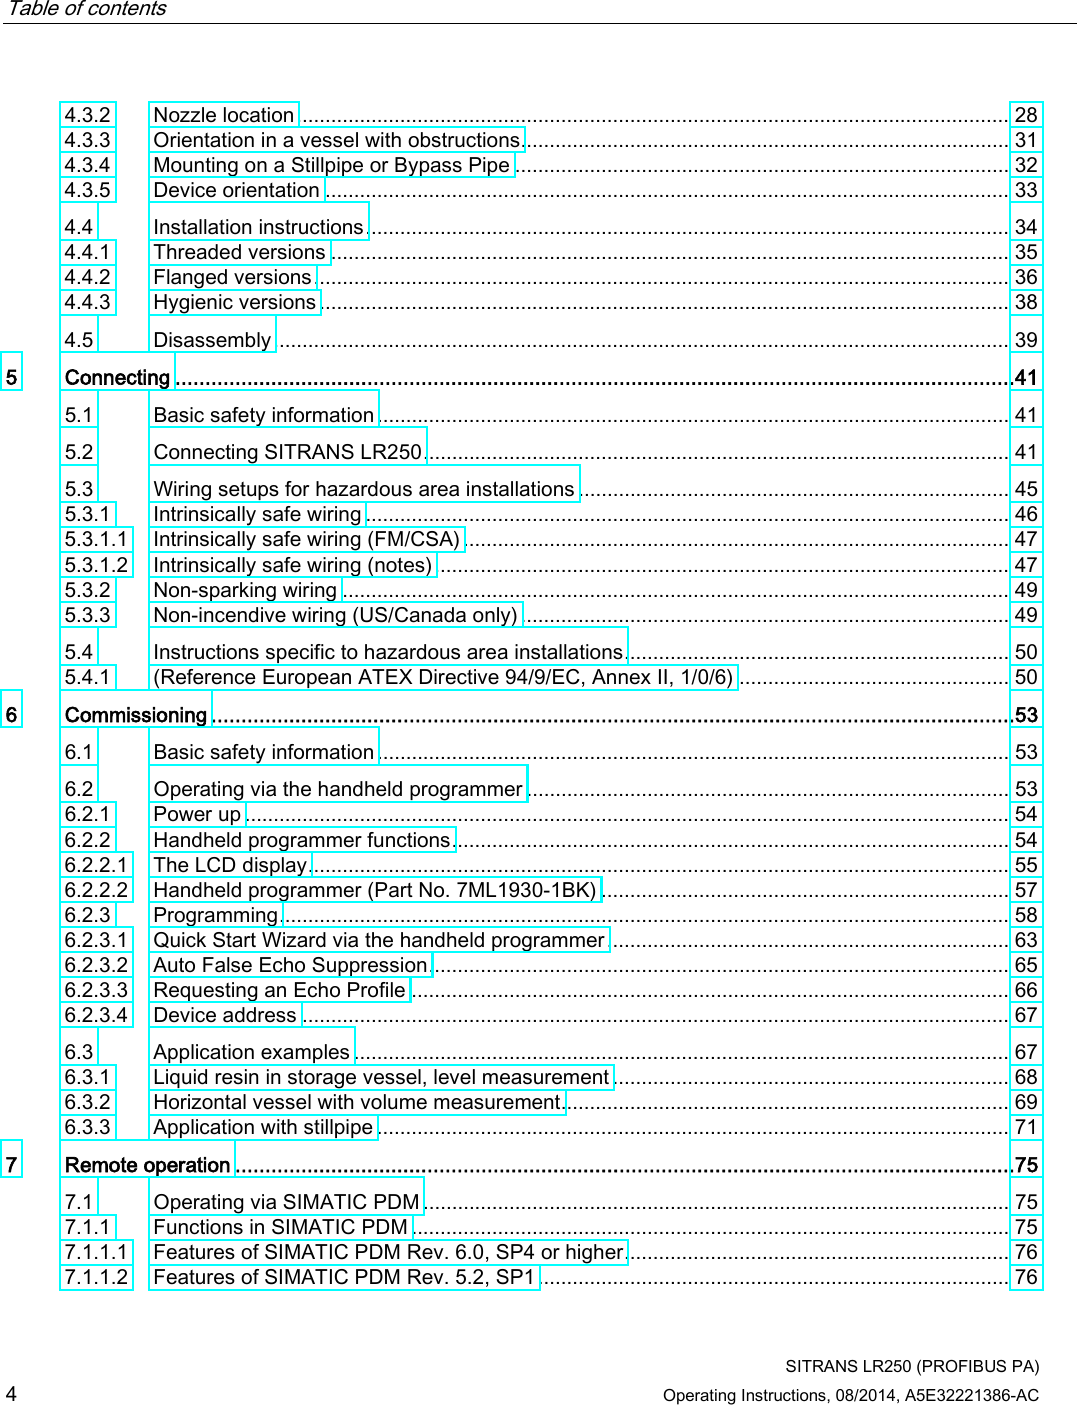 Table of contents      SITRANS LR250 (PROFIBUS PA) 4 Operating Instructions, 08/2014, A5E32221386-AC 4.3.2 Nozzle location ............................................................................................................................ 28 4.3.3 Orientation in a vessel with obstructions ..................................................................................... 31 4.3.4 Mounting on a Stillpipe or Bypass Pipe ...................................................................................... 32 4.3.5 Device orientation ....................................................................................................................... 33 4.4 Installation instructions ................................................................................................................ 34 4.4.1 Threaded versions ...................................................................................................................... 35 4.4.2 Flanged versions ......................................................................................................................... 36 4.4.3 Hygienic versions ........................................................................................................................ 38 4.5 Disassembly ................................................................................................................................ 39 5  Connecting ............................................................................................................................................41 5.1 Basic safety information .............................................................................................................. 41 5.2 Connecting SITRANS LR250 ...................................................................................................... 41 5.3 Wiring setups for hazardous area installations ........................................................................... 45 5.3.1 Intrinsically safe wiring ................................................................................................................ 46 5.3.1.1 Intrinsically safe wiring (FM/CSA) ............................................................................................... 47 5.3.1.2 Intrinsically safe wiring (notes) .................................................................................................... 47 5.3.2 Non-sparking wiring .................................................................................................................... 49 5.3.3 Non-incendive wiring (US/Canada only) ..................................................................................... 49 5.4 Instructions specific to hazardous area installations ................................................................... 50 5.4.1 (Reference European ATEX Directive 94/9/EC, Annex II, 1/0/6) ............................................... 50 6  Commissioning ......................................................................................................................................53 6.1 Basic safety information .............................................................................................................. 53 6.2 Operating via the handheld programmer .................................................................................... 53 6.2.1 Power up ..................................................................................................................................... 54 6.2.2 Handheld programmer functions ................................................................................................. 54 6.2.2.1 The LCD display .......................................................................................................................... 55 6.2.2.2 Handheld programmer (Part No. 7ML1930-1BK) ....................................................................... 57 6.2.3 Programming ............................................................................................................................... 58 6.2.3.1 Quick Start Wizard via the handheld programmer ...................................................................... 63 6.2.3.2 Auto False Echo Suppression ..................................................................................................... 65 6.2.3.3 Requesting an Echo Profile ........................................................................................................ 66 6.2.3.4 Device address ........................................................................................................................... 67 6.3 Application examples .................................................................................................................. 67 6.3.1 Liquid resin in storage vessel, level measurement ..................................................................... 68 6.3.2 Horizontal vessel with volume measurement.............................................................................. 69 6.3.3 Application with stillpipe .............................................................................................................. 71 7  Remote operation ..................................................................................................................................75 7.1 Operating via SIMATIC PDM ...................................................................................................... 75 7.1.1 Functions in SIMATIC PDM ........................................................................................................ 75 7.1.1.1 Features of SIMATIC PDM Rev. 6.0, SP4 or higher ................................................................... 76 7.1.1.2 Features of SIMATIC PDM Rev. 5.2, SP1 .................................................................................. 76 